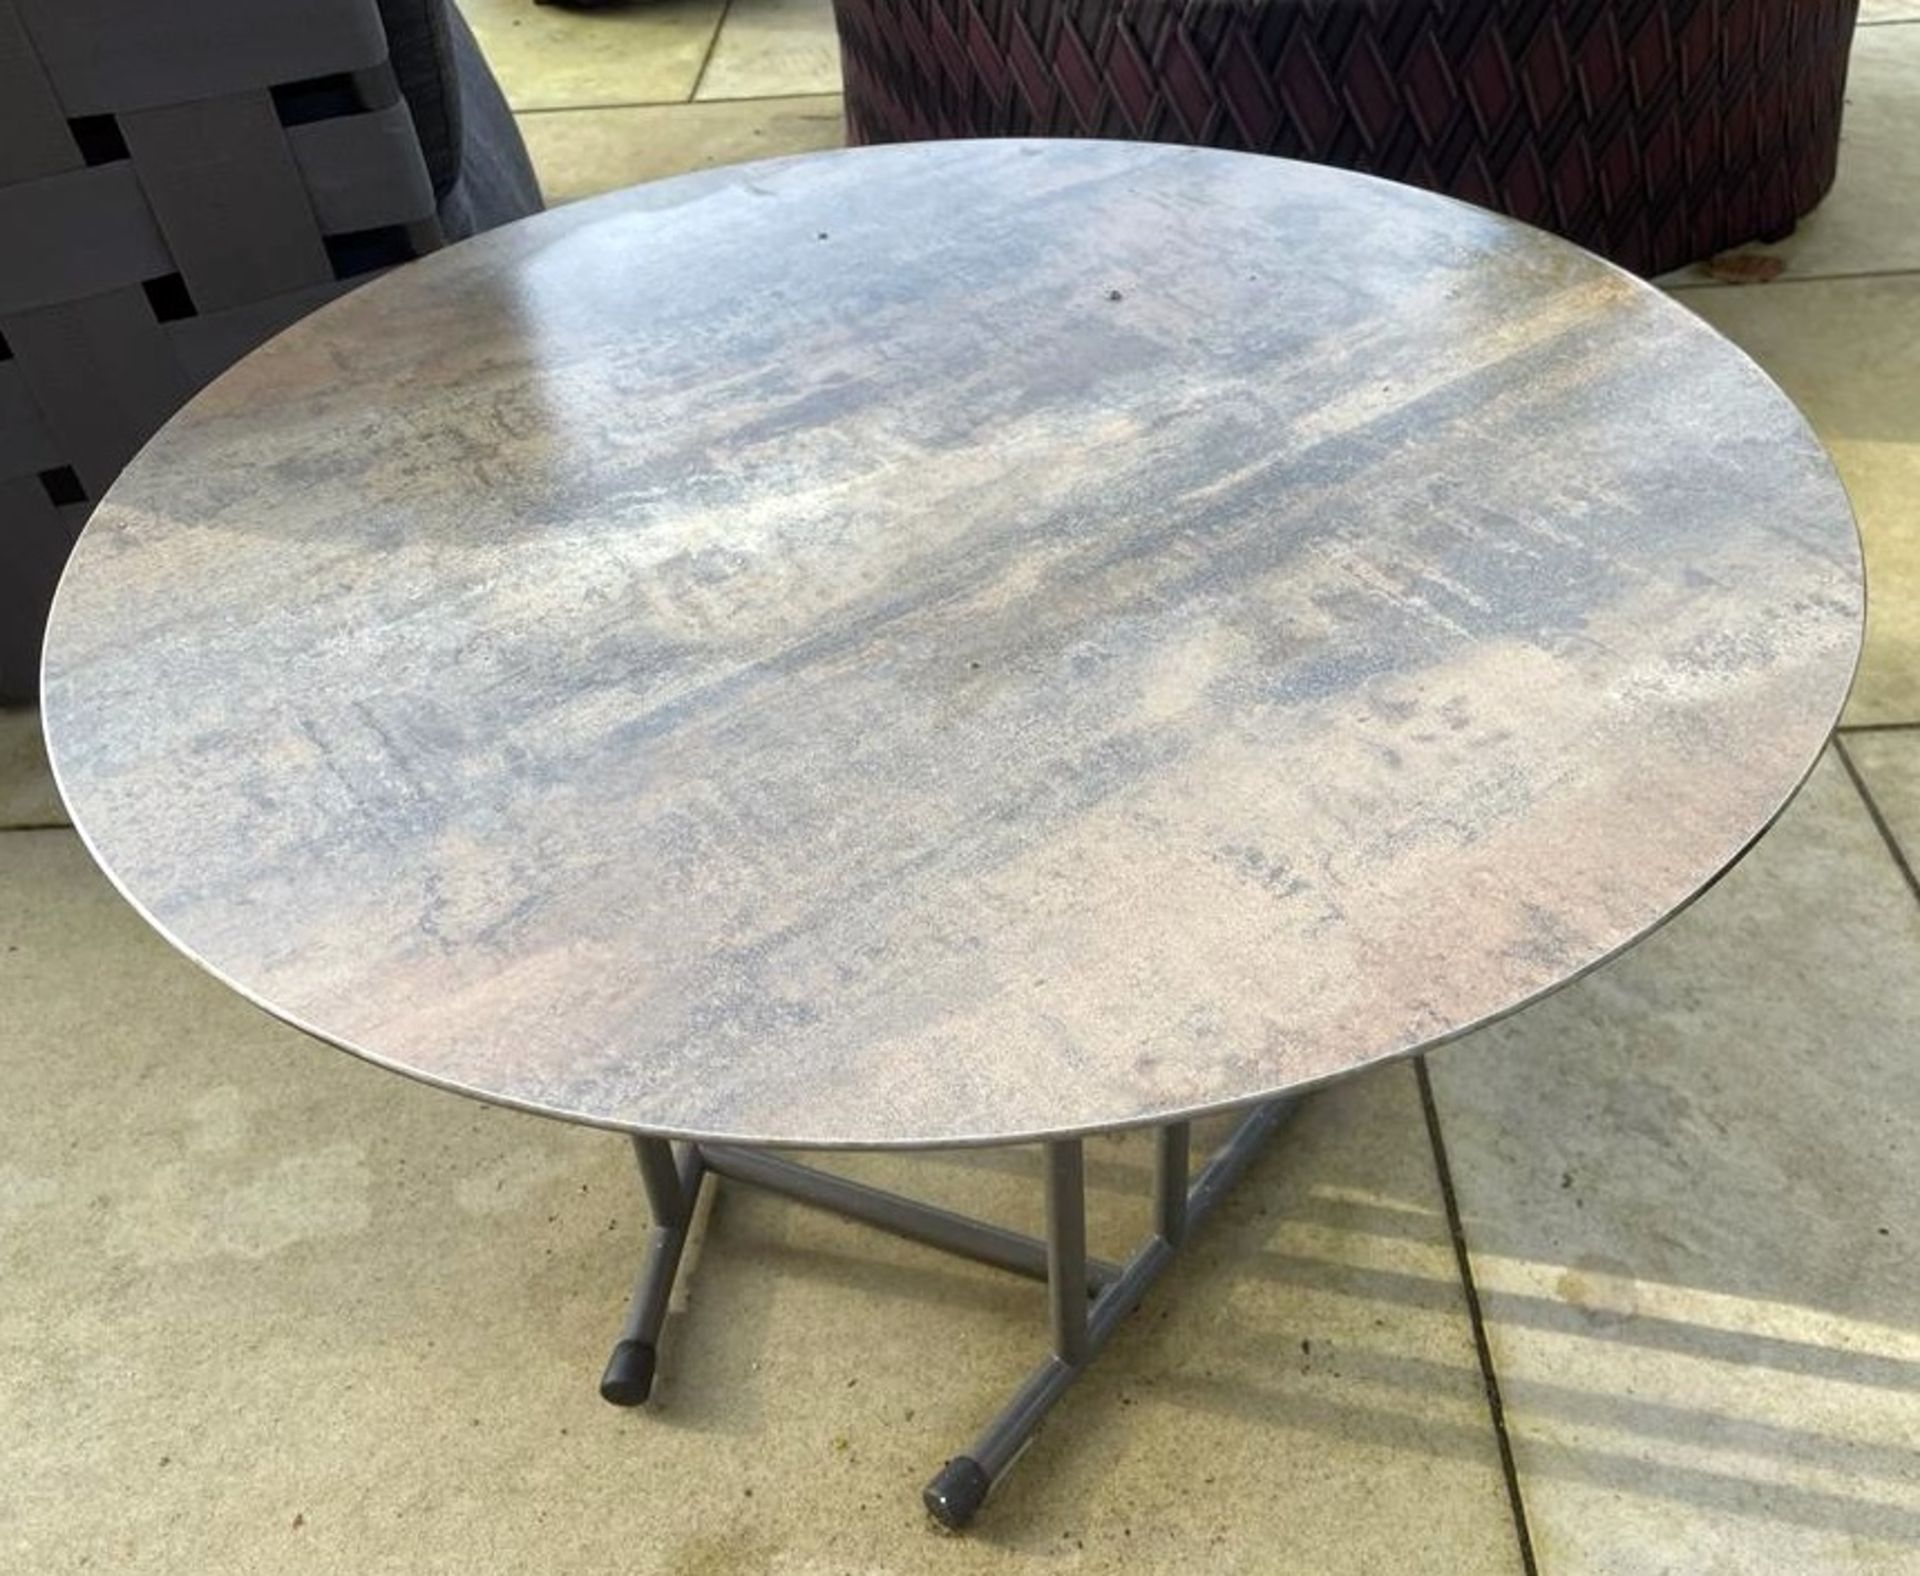 1 x Large Round Stone Topped Outdoor Coffee Table - From an Exclusive Hale Property - No VAT On - Image 2 of 2